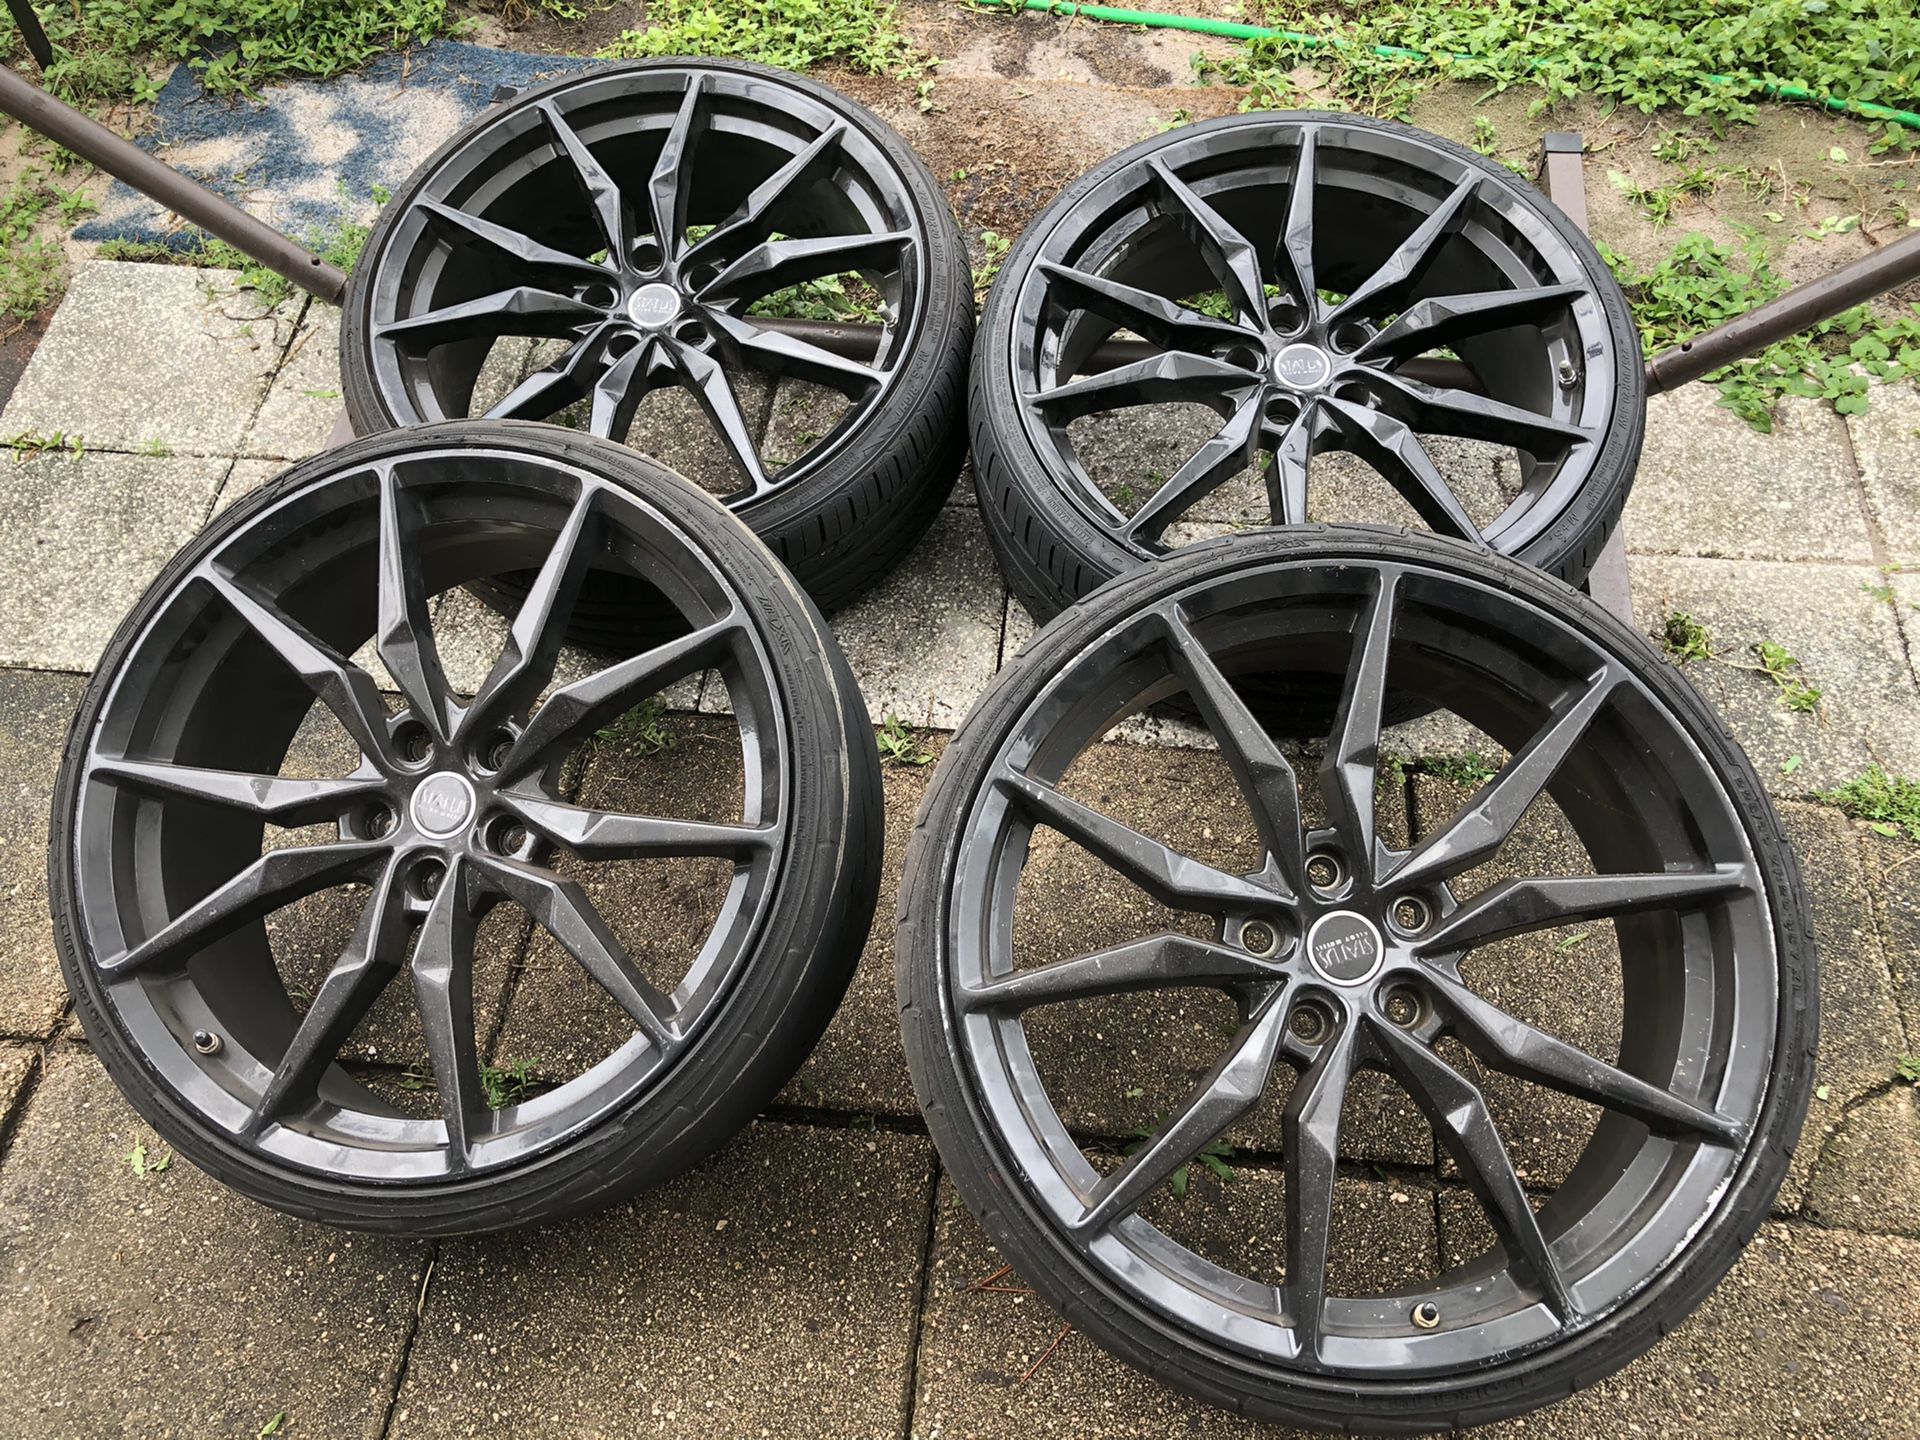 4 polished black wheels and tires